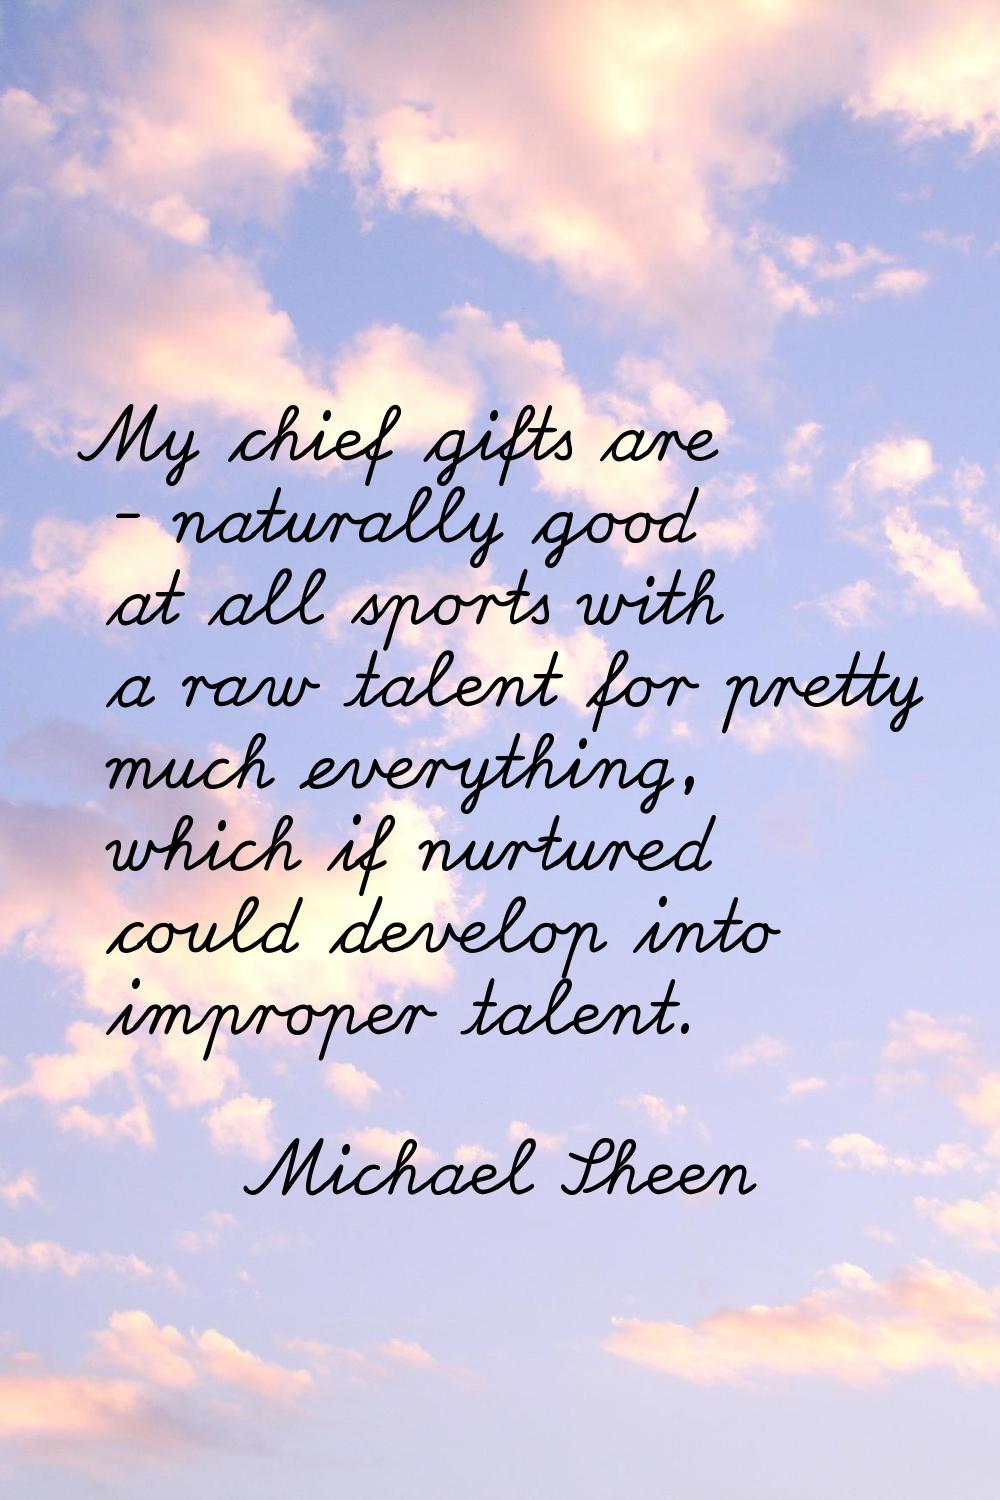 My chief gifts are - naturally good at all sports with a raw talent for pretty much everything, whi